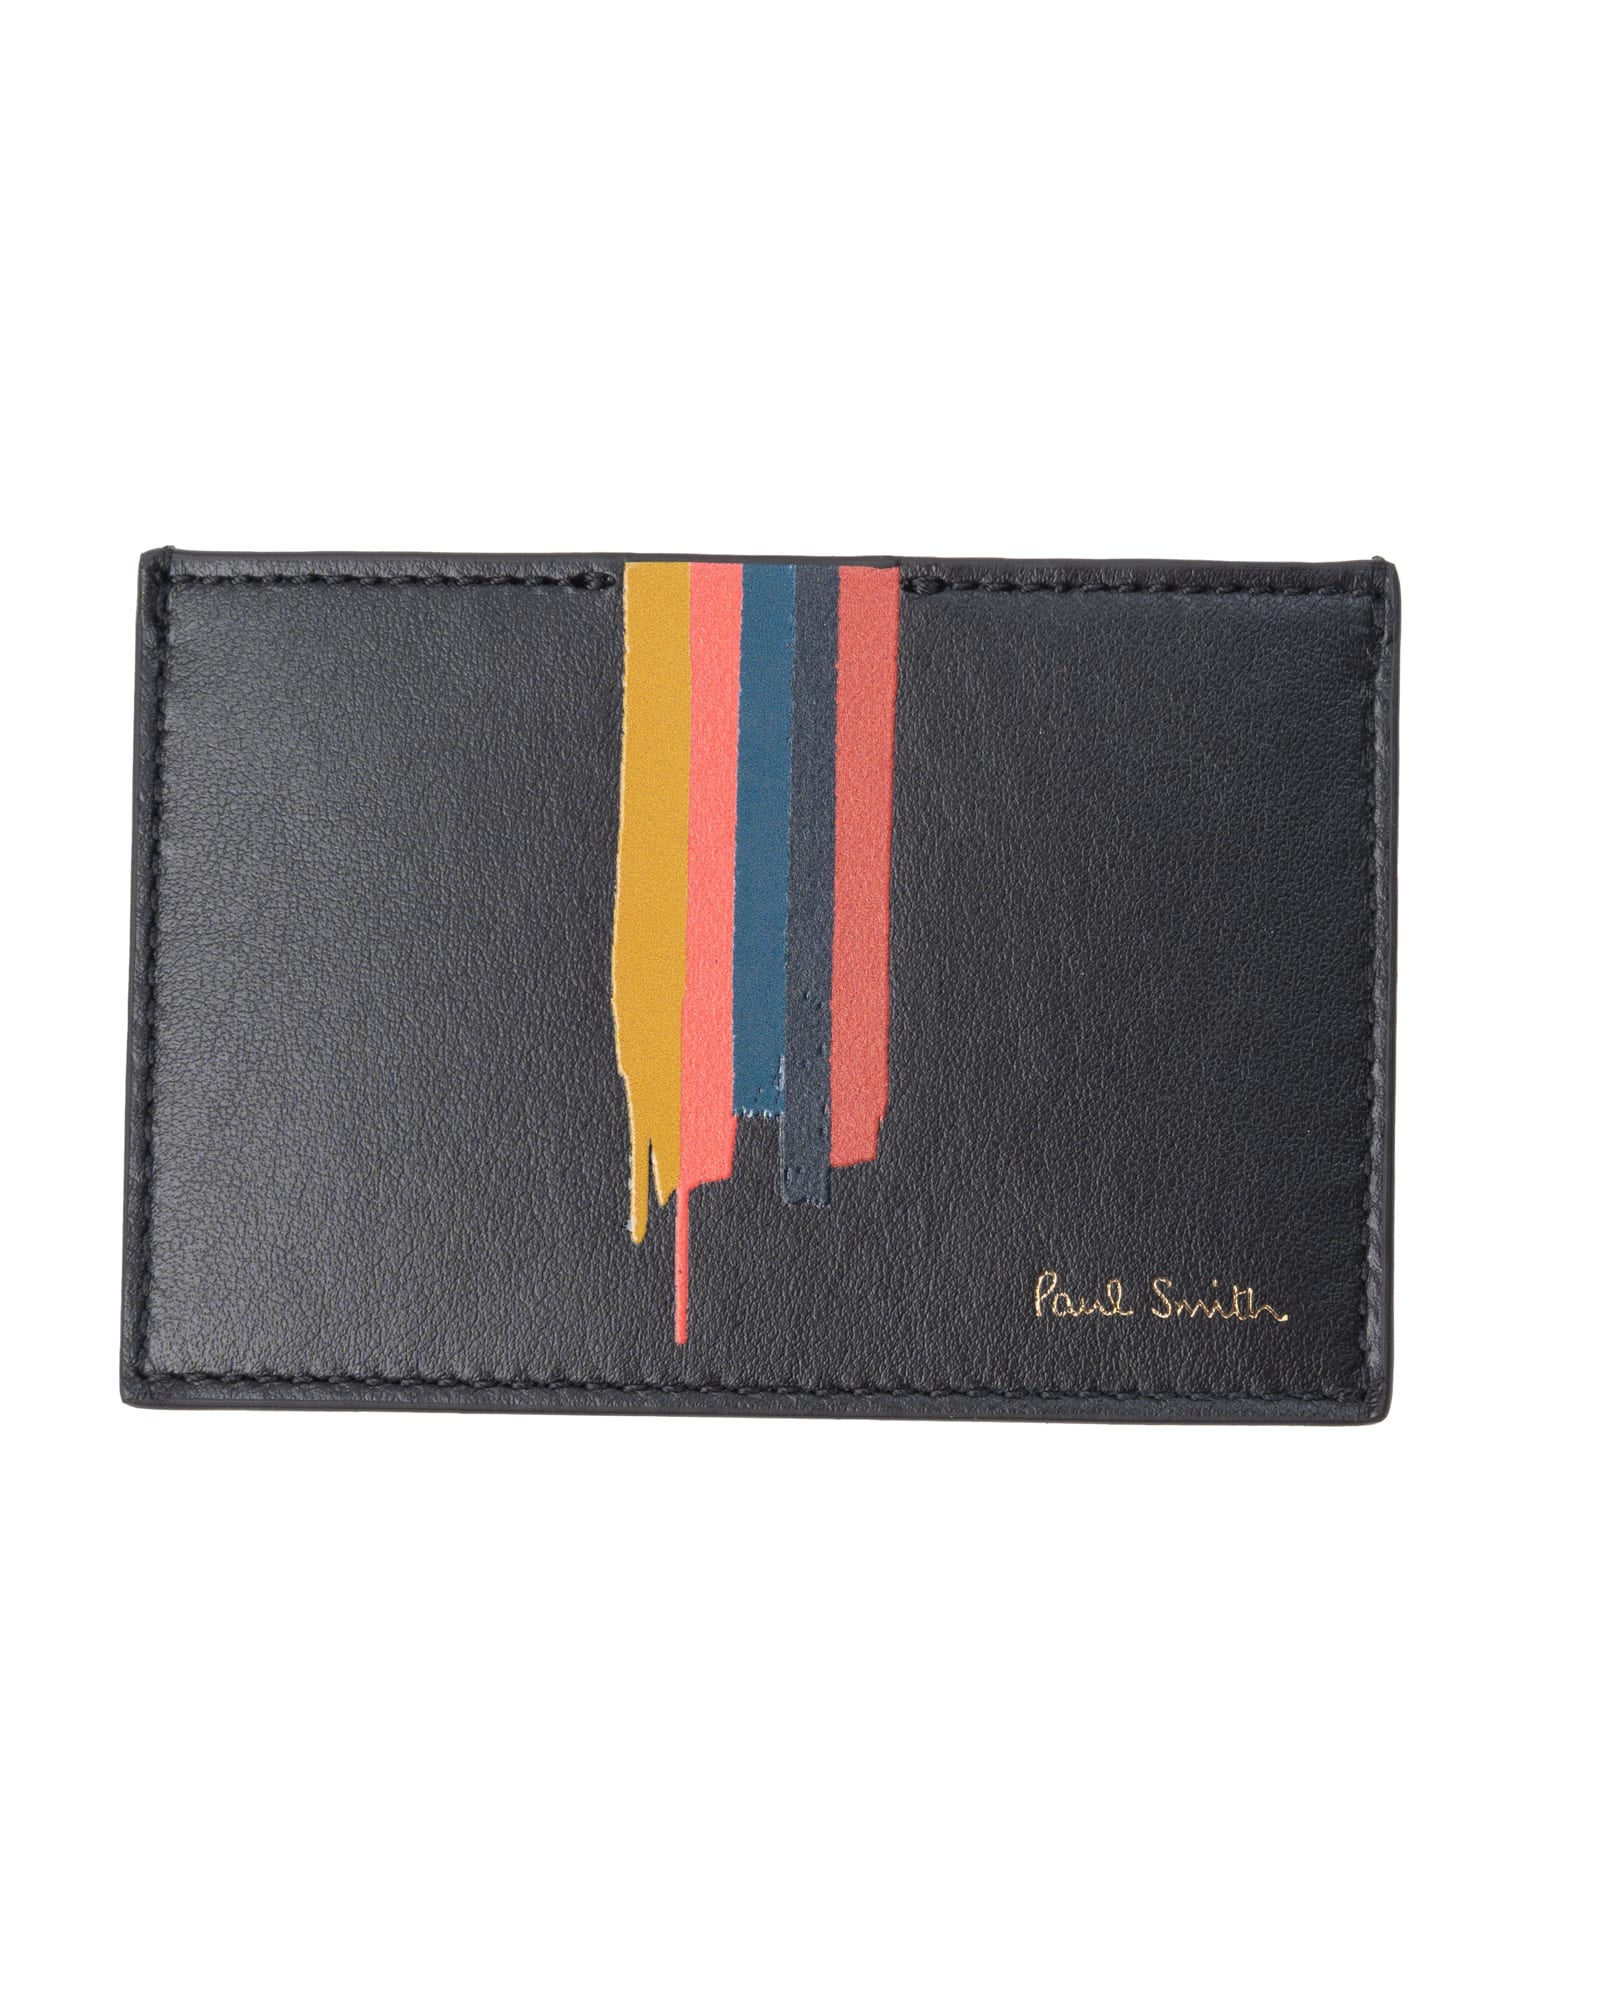 Paul Smith Painted Stripe black leather credit card holder